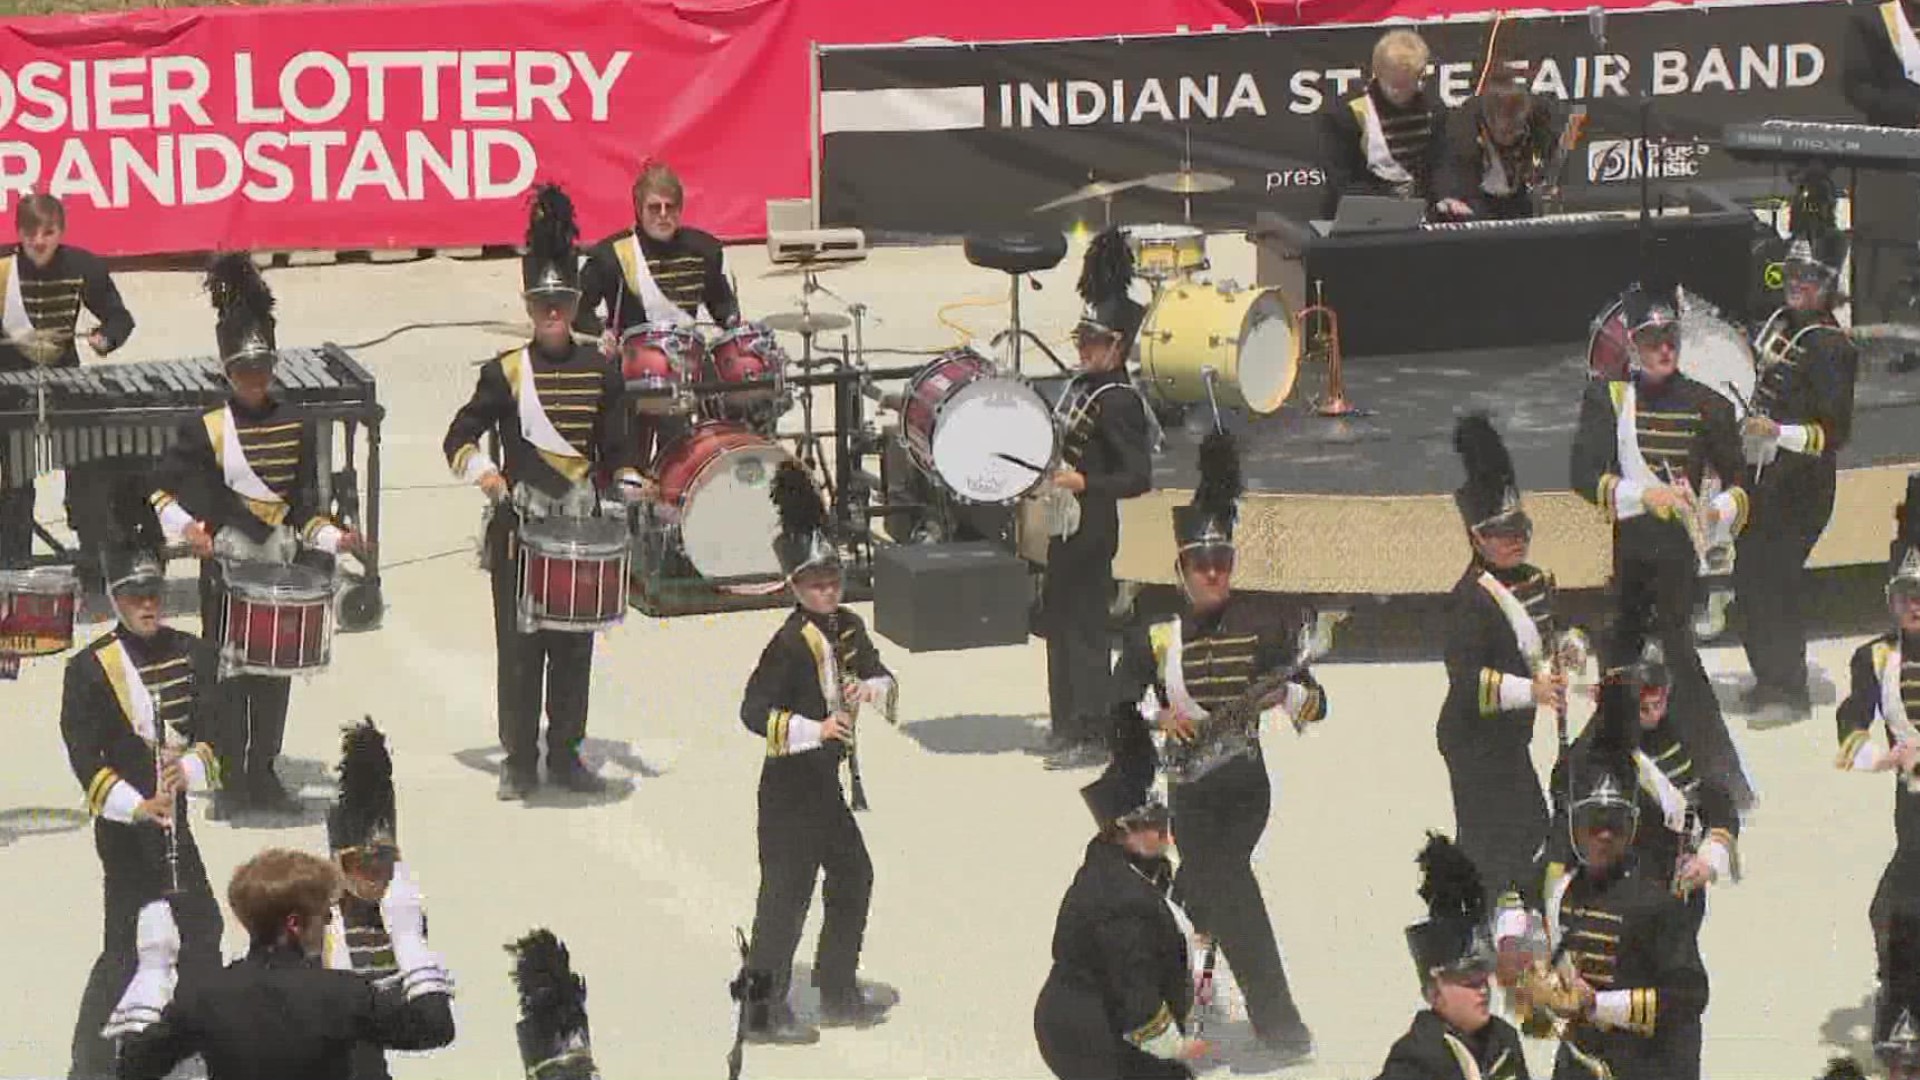 Indiana State Fair Band Day finalists named